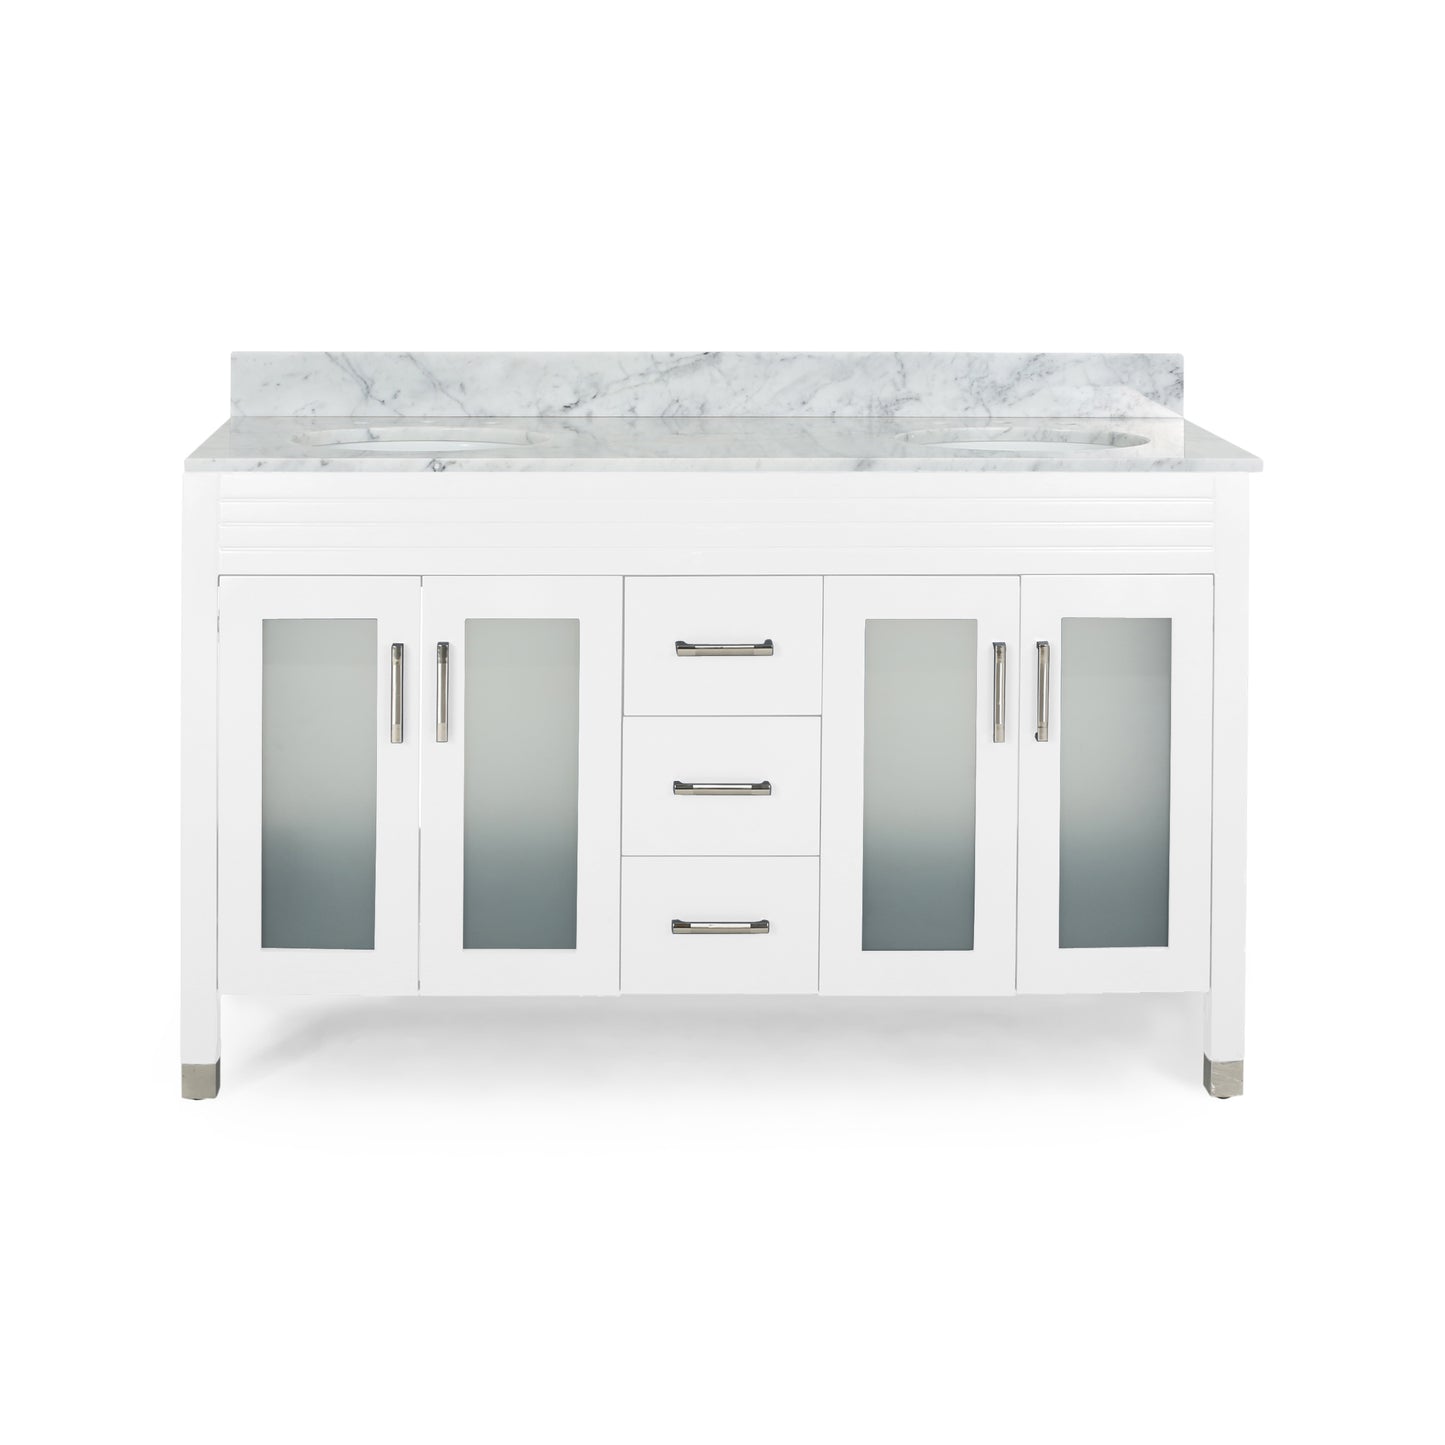 Holdame Contemporary 60" Wood Double Sink Bathroom Vanity with Marble Counter Top with Carrara White Marble